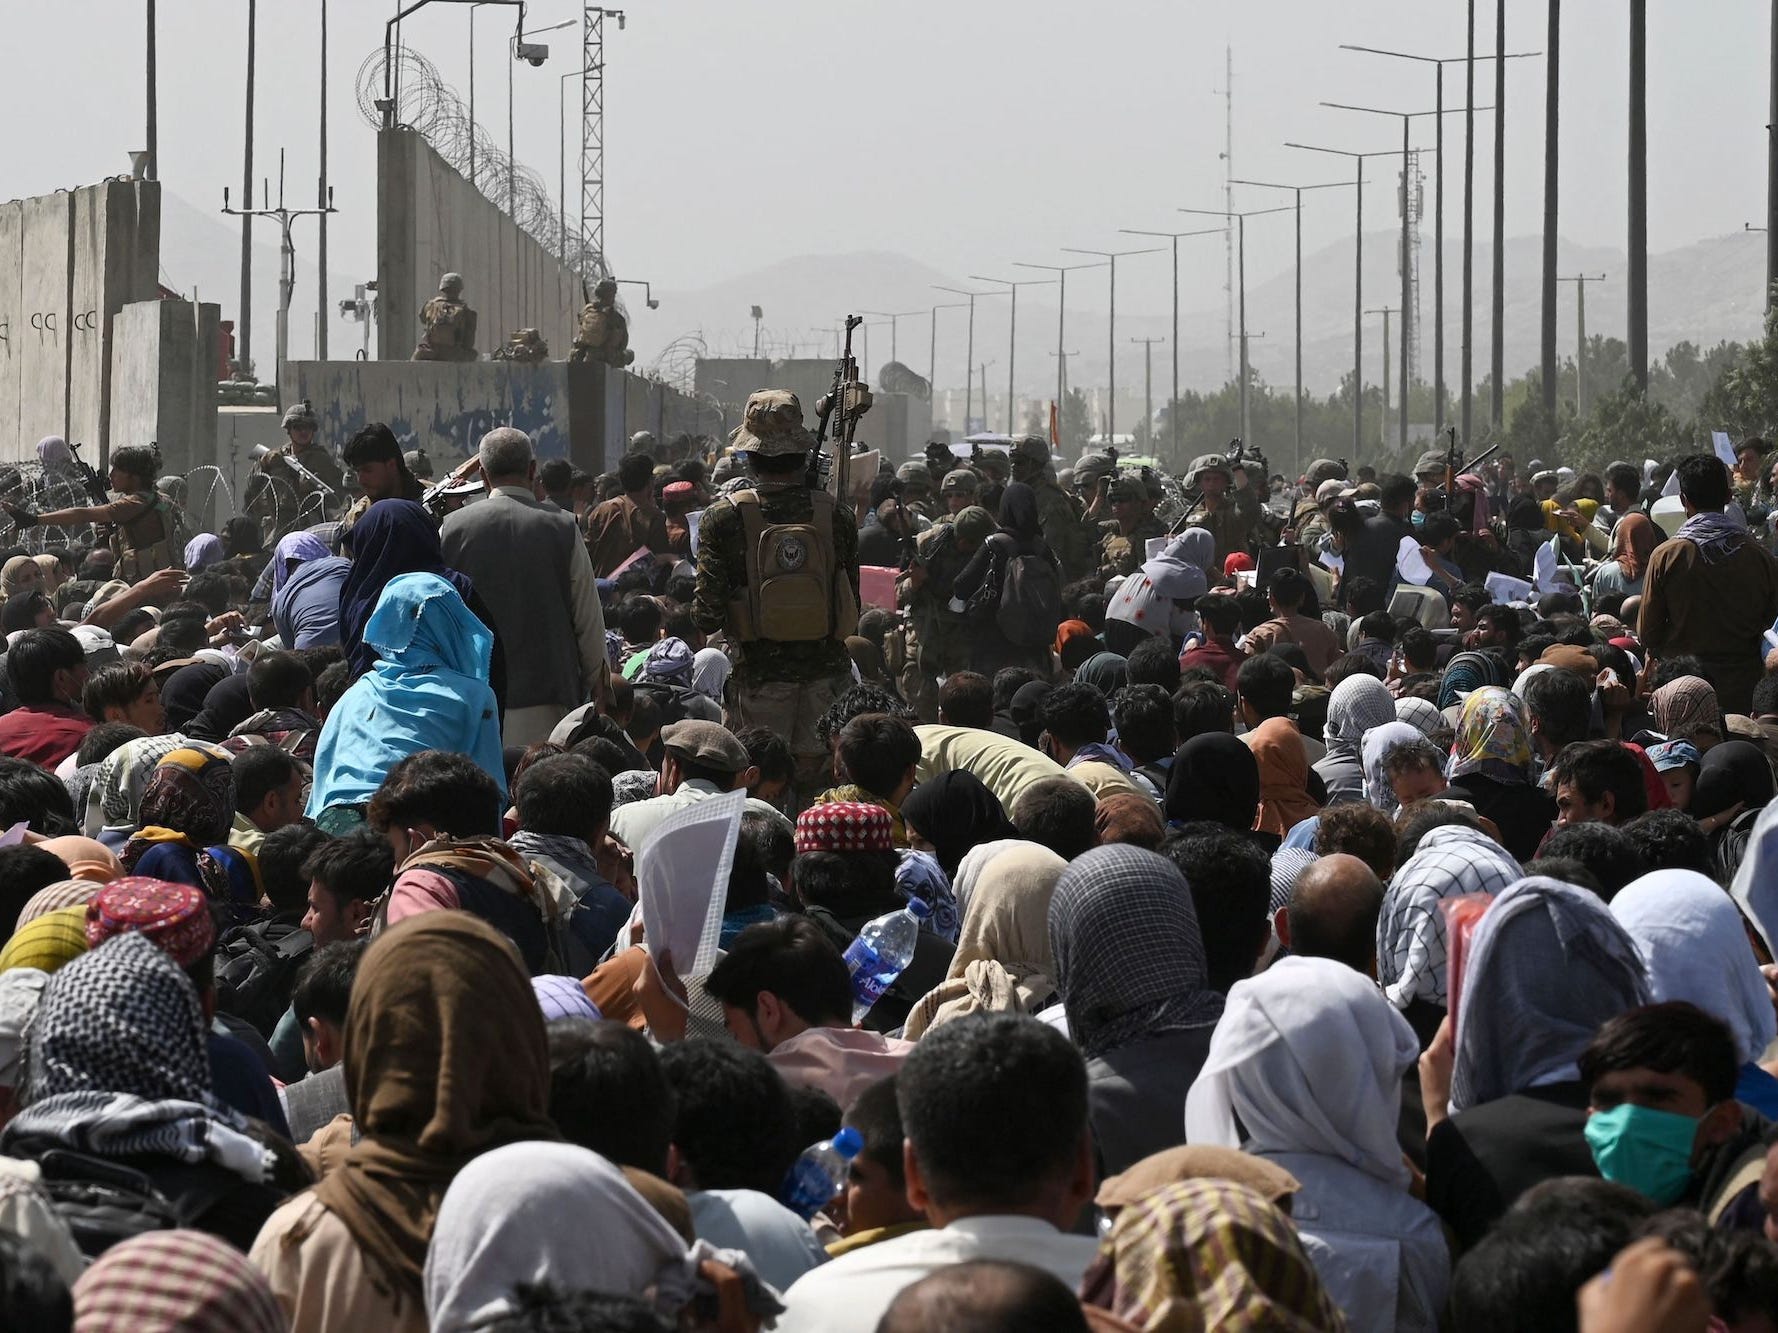 a large crowd gathers with fences in the distance